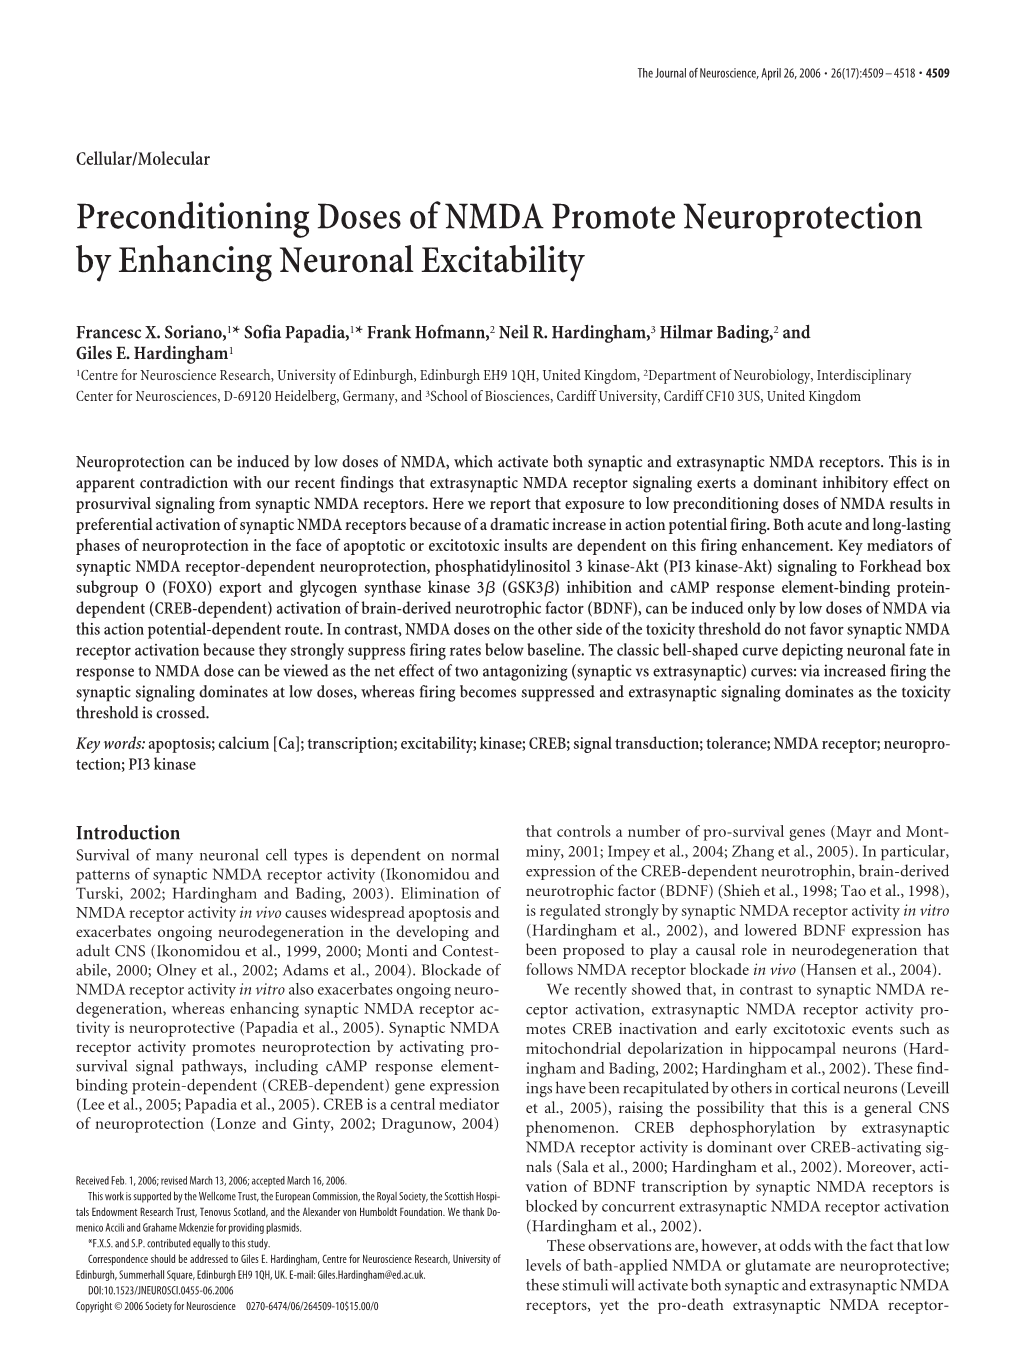 Preconditioning Doses of NMDA Promote Neuroprotection by Enhancing Neuronal Excitability